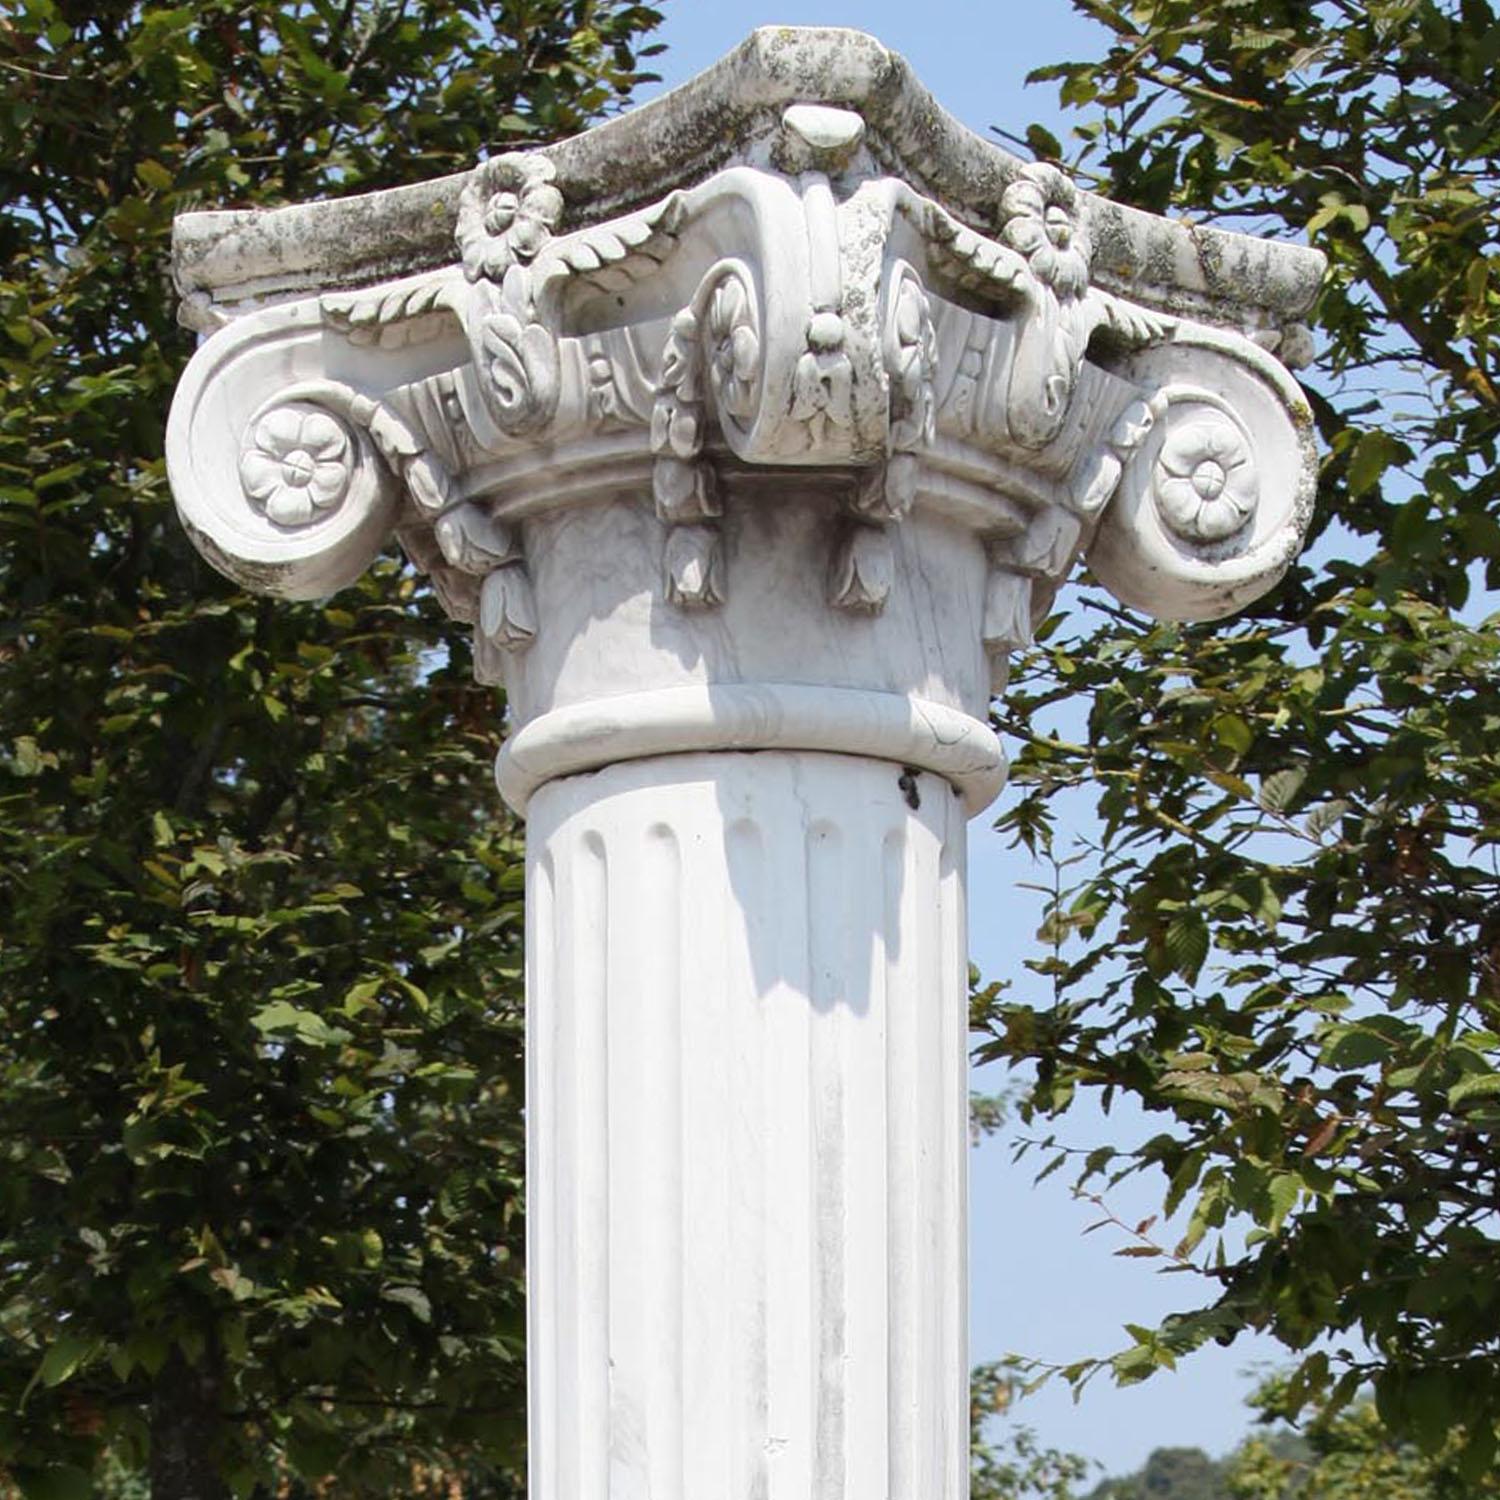 Tall column on a square plinth with a round base, a fluted shaft and a volute capita with flower décor. The column is hand-carved out of white marble.